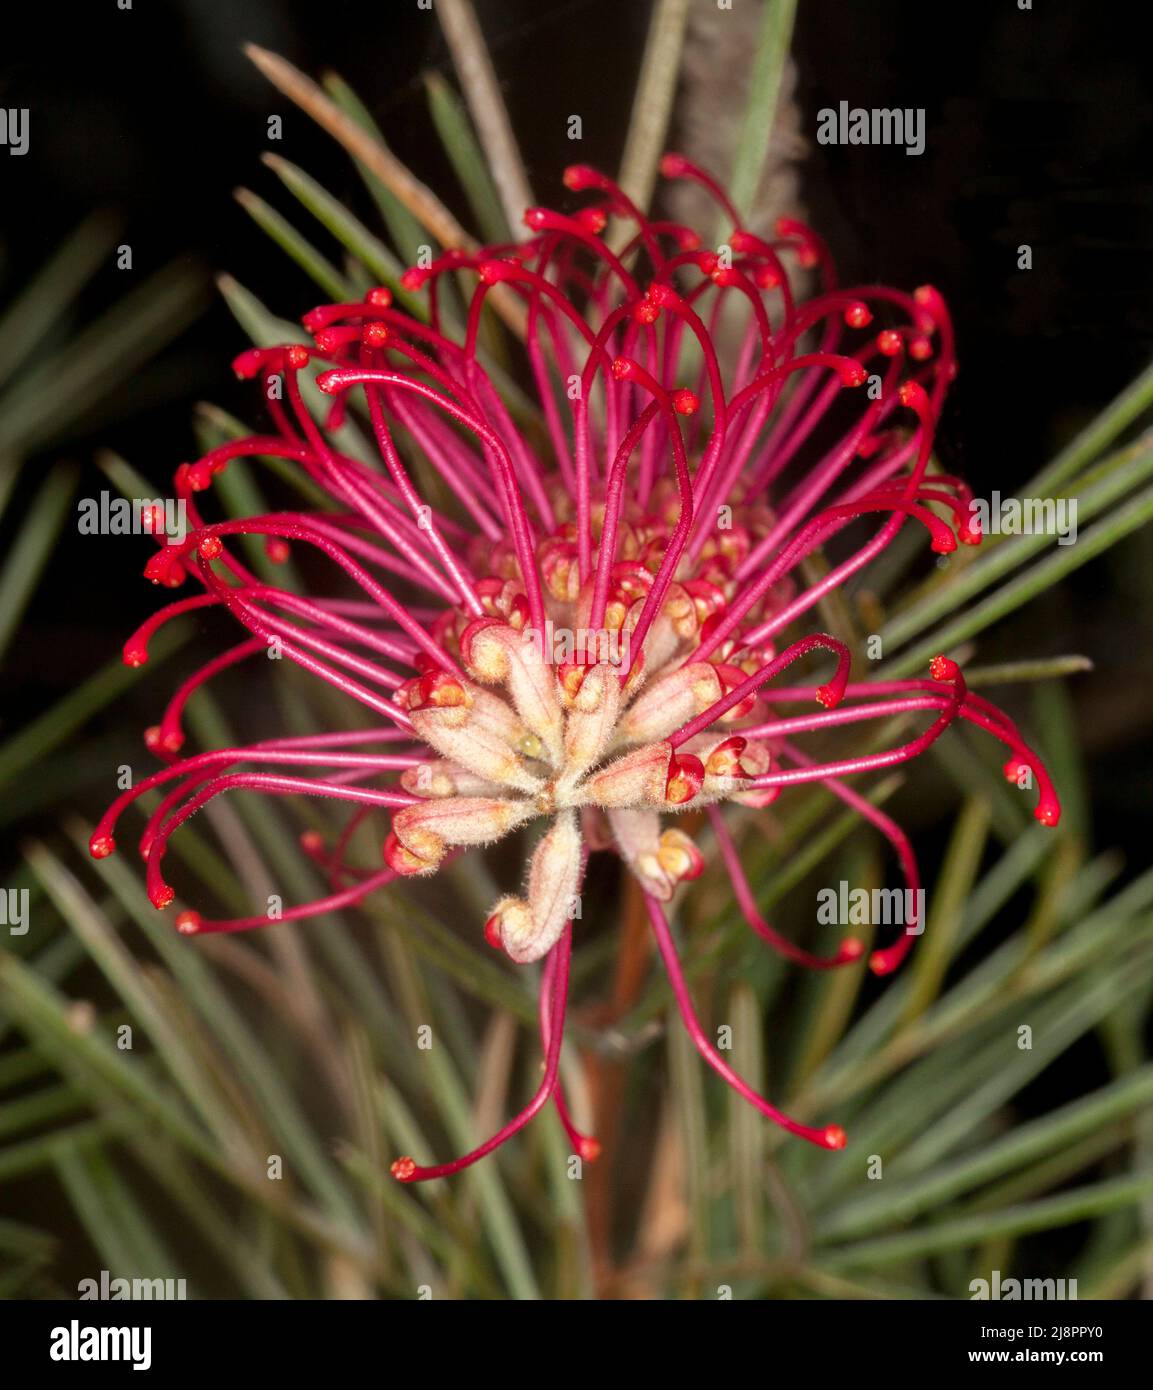 Stunning vivid red flower of Grevillea 'Pride of Anzac', a drought tolerant  Australian native shrub, on a background of dark green leaves Stock Photo